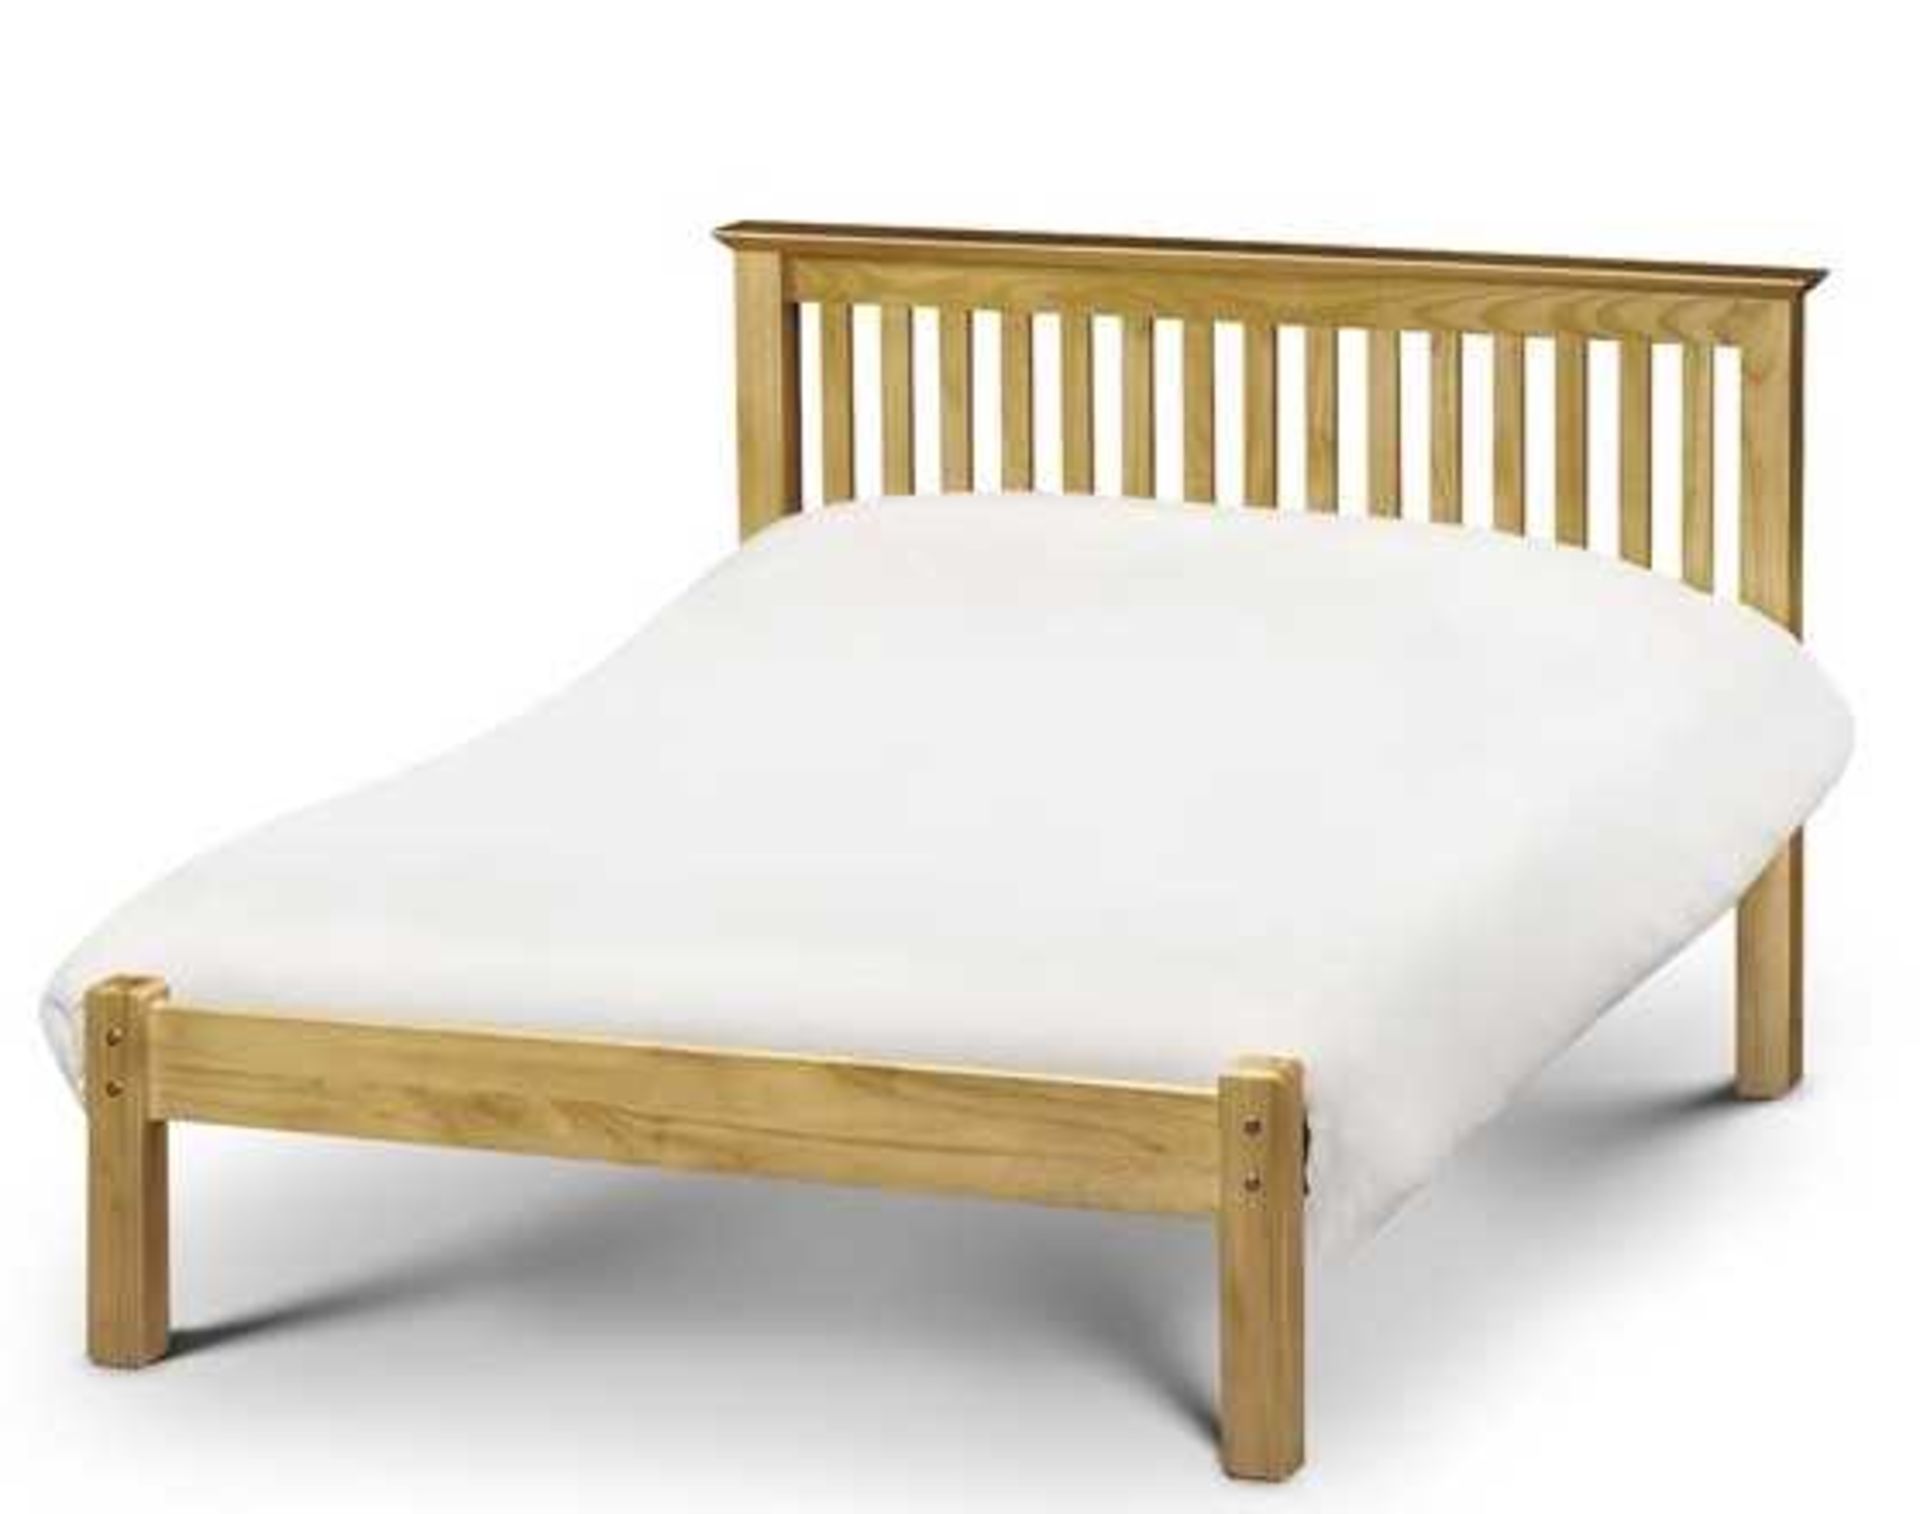 | 1X | CARPETRIGHT BALI LOW FOOT END 5FT PINE BEDFRAME | 2 BOXES | UNCHECKED & BOXED | RRP ?379 |